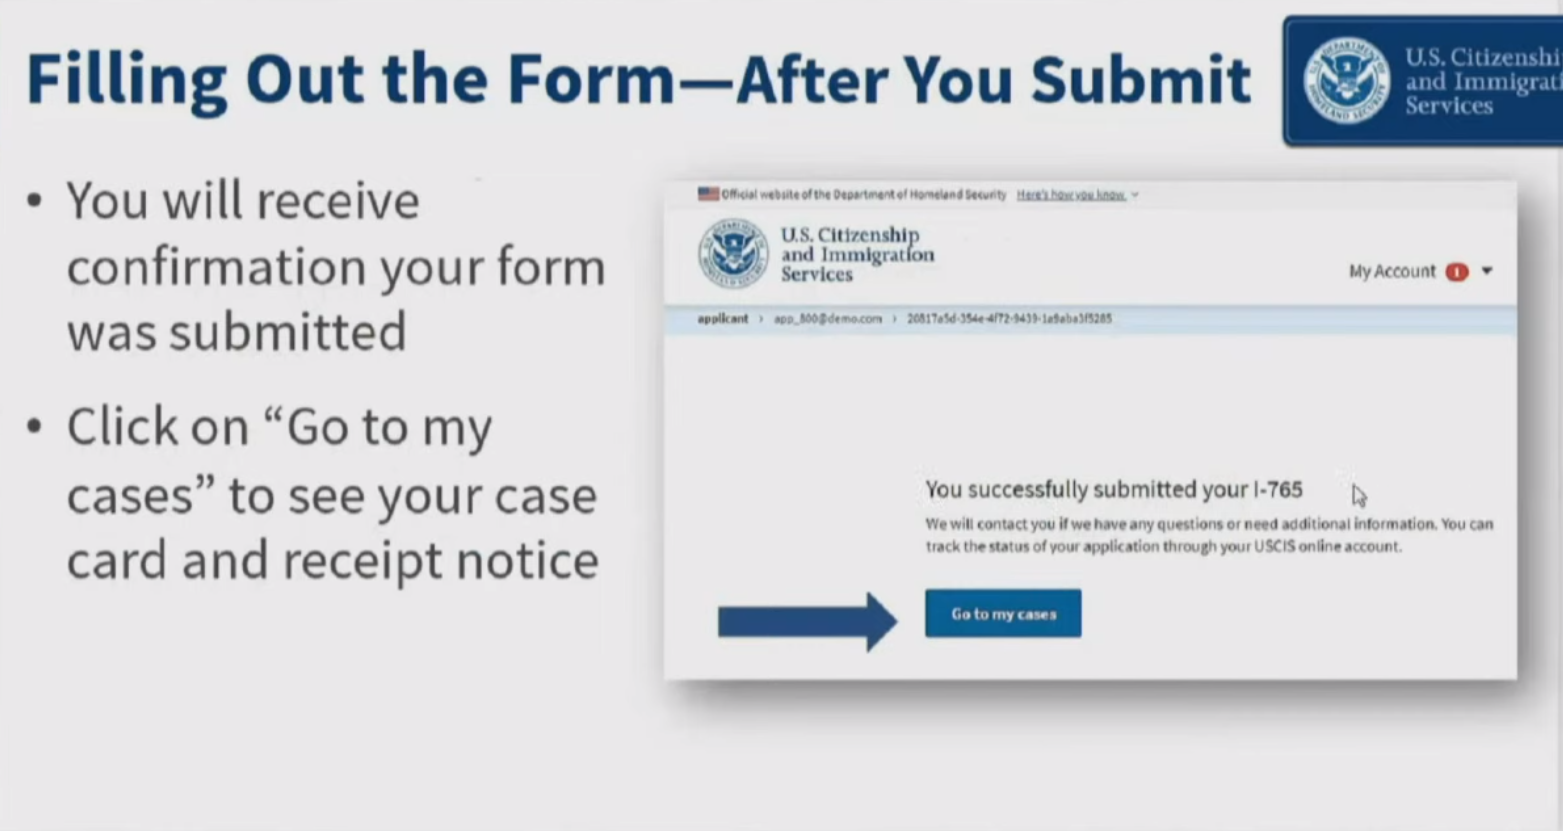 After you submit: You will receive confirmation your form was submitted. Click on "Go to my cases" to see your case card and receipt notice. 